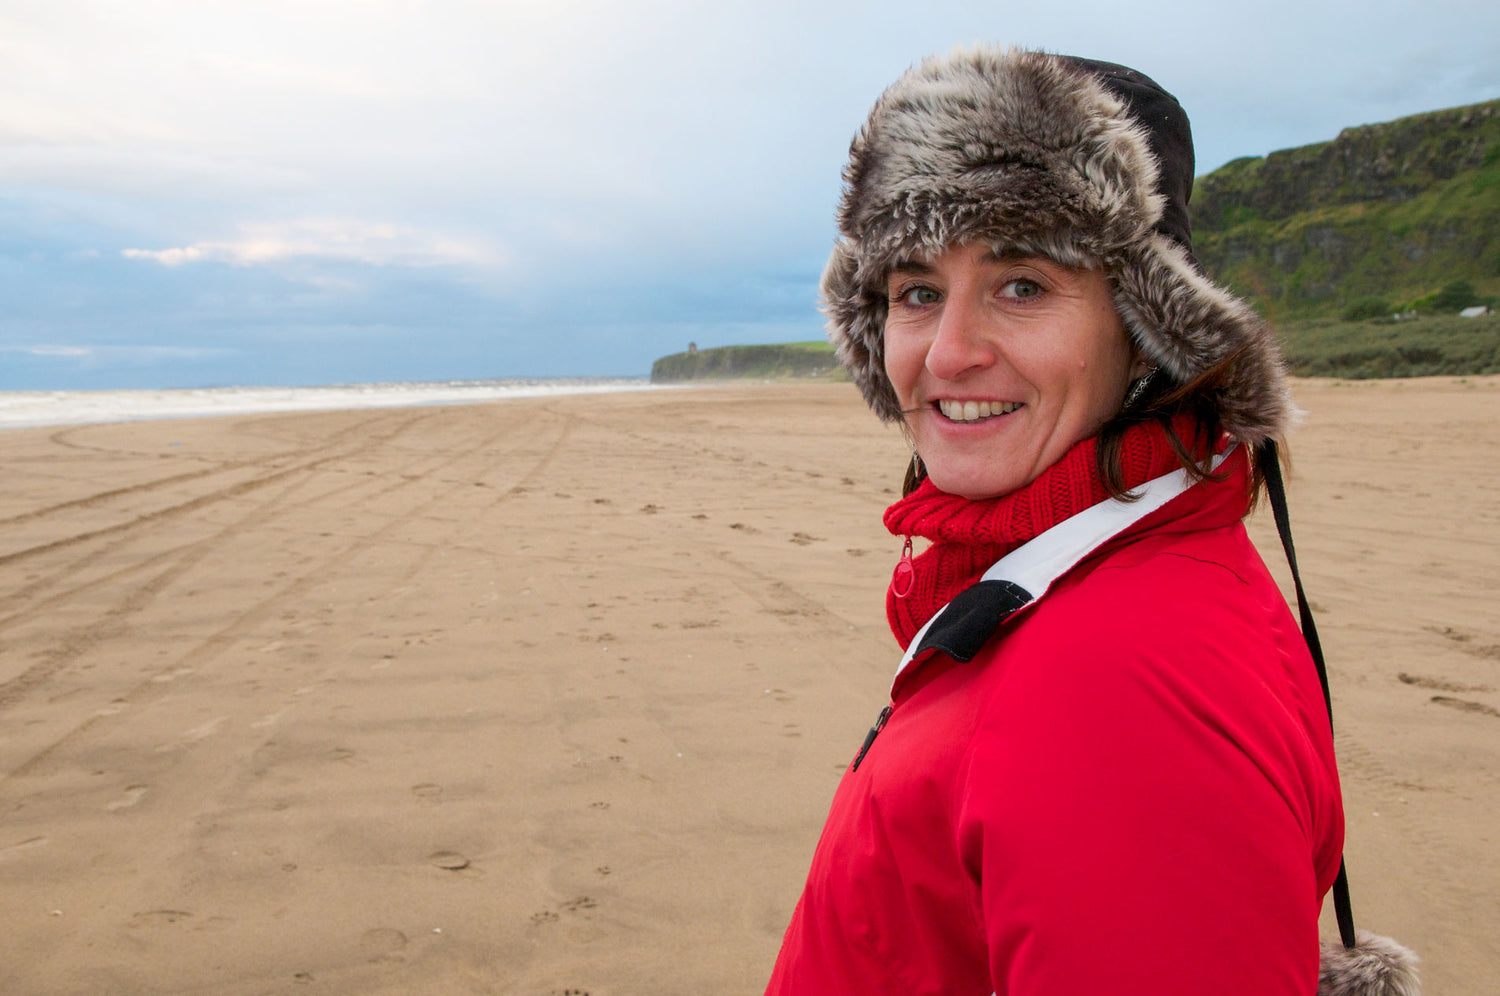 Ruth McEwan-Lyon is NI Silver's Jewellery Maker (Goldsmith).  Ruth is looking straight at the camera and smiling. Ruth is standing on Downhill Strand Beach and wearing a big fluffy hat on a cold day.